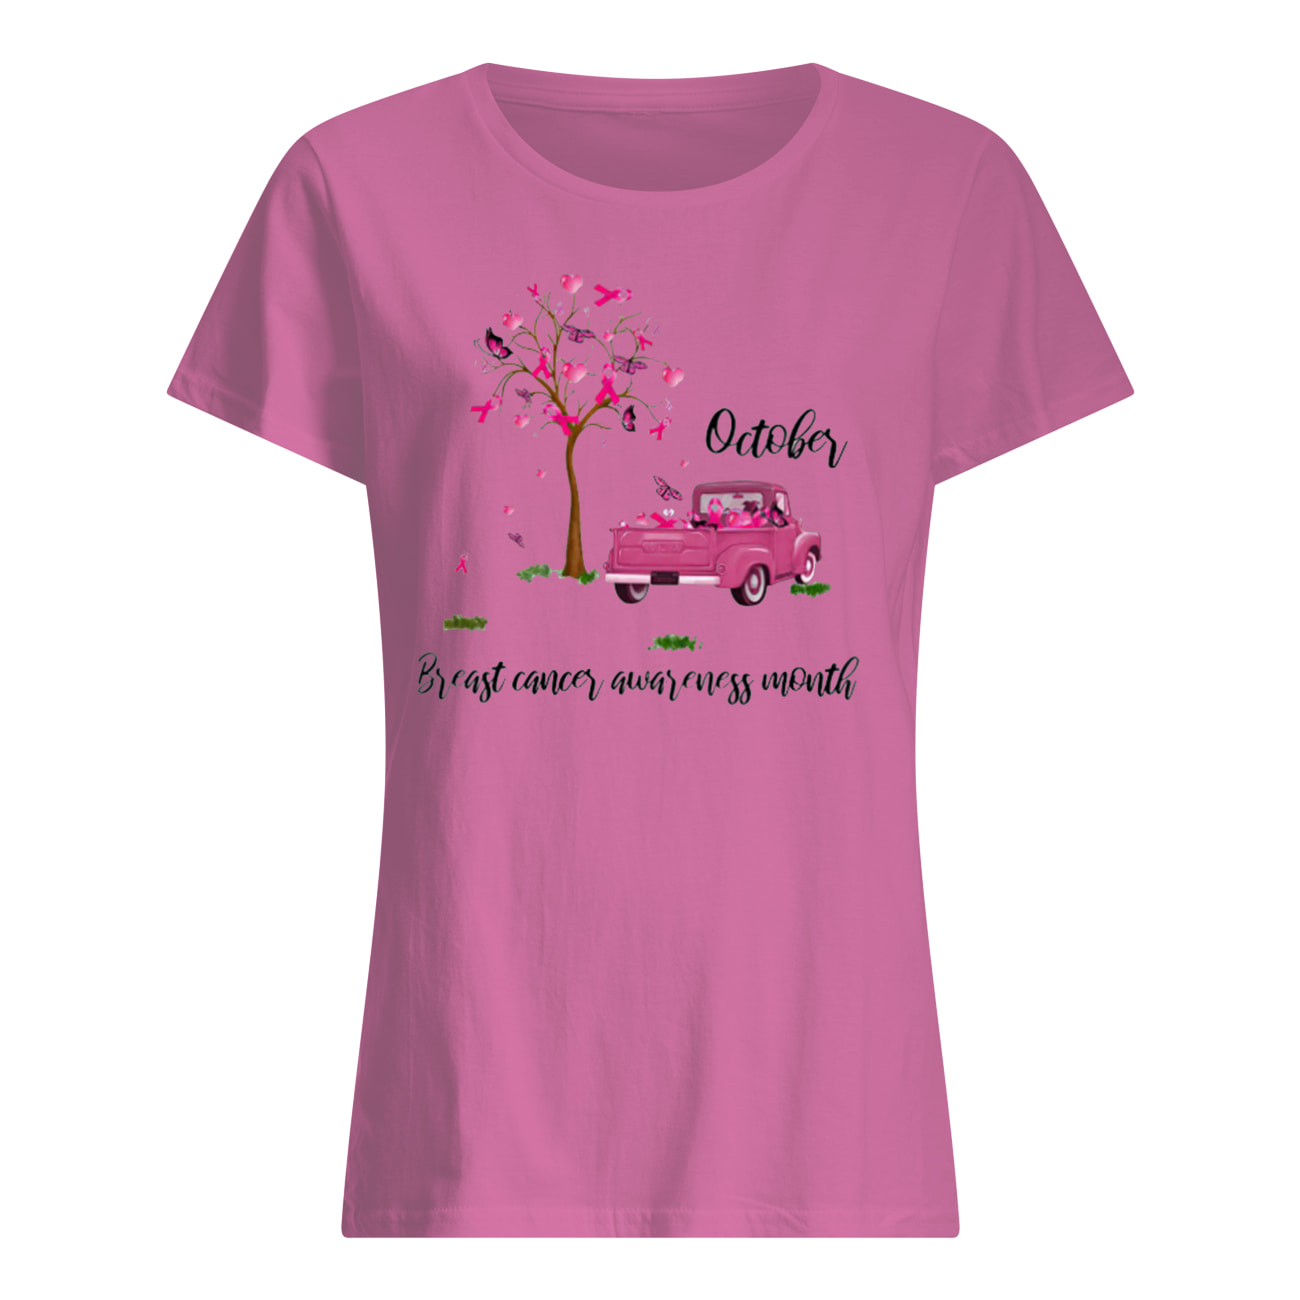 Tree of pink ribbons october is breast cancer awareness month womens shirt